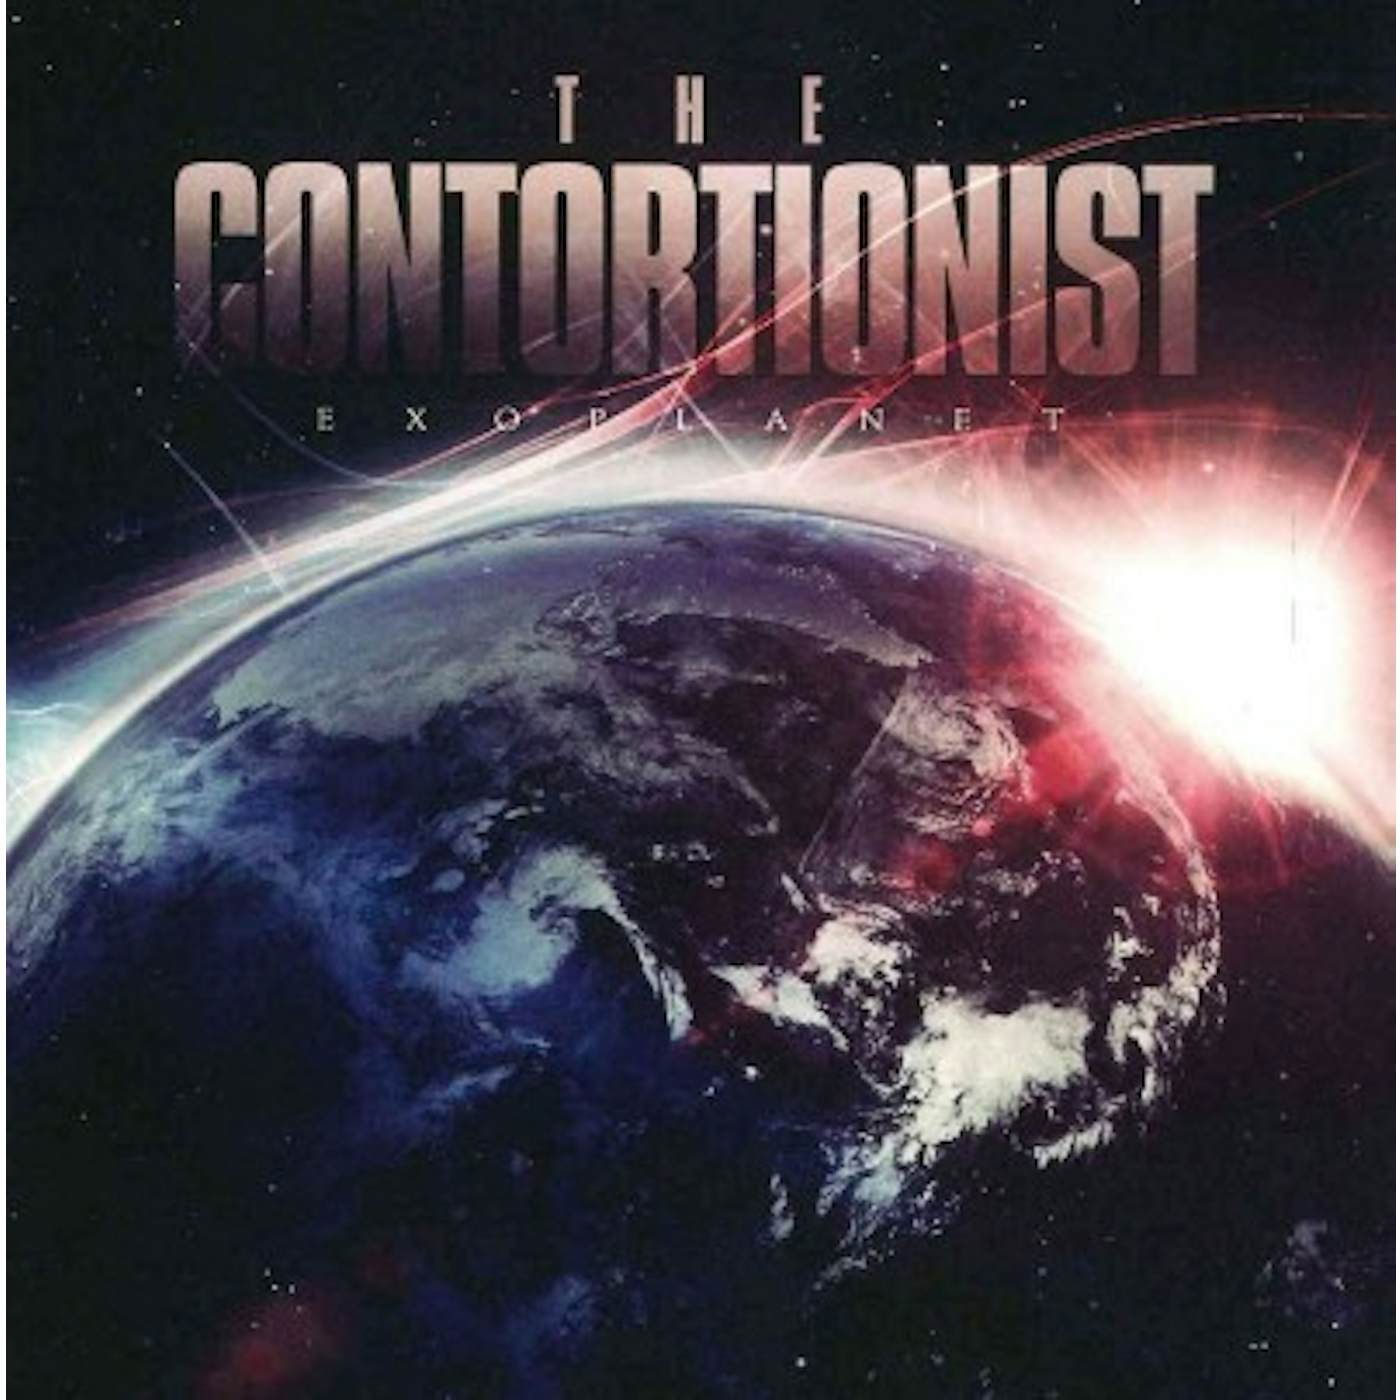 The Contortionist Exoplanet CD